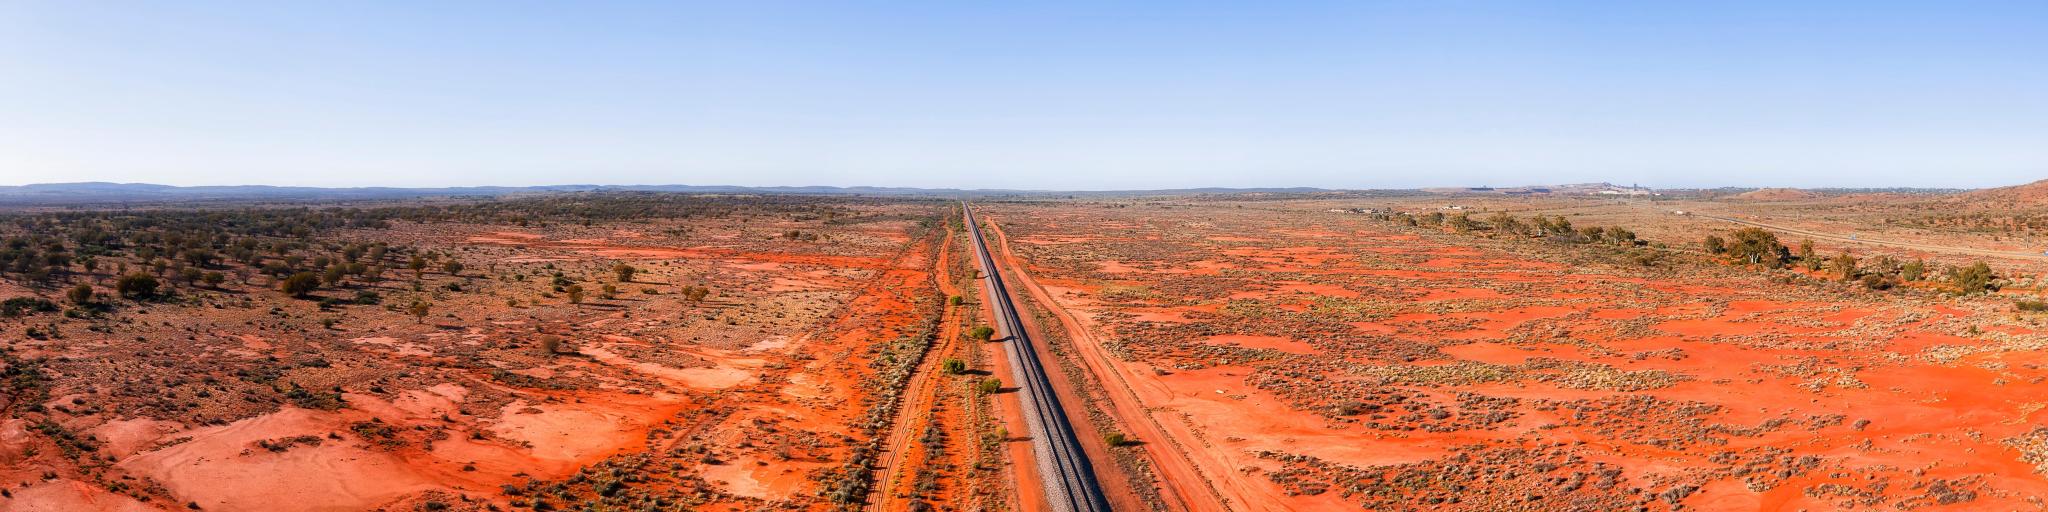 Wide landscape of red soil outback near Broken hill in Australia over railway road track and Barrier highway.